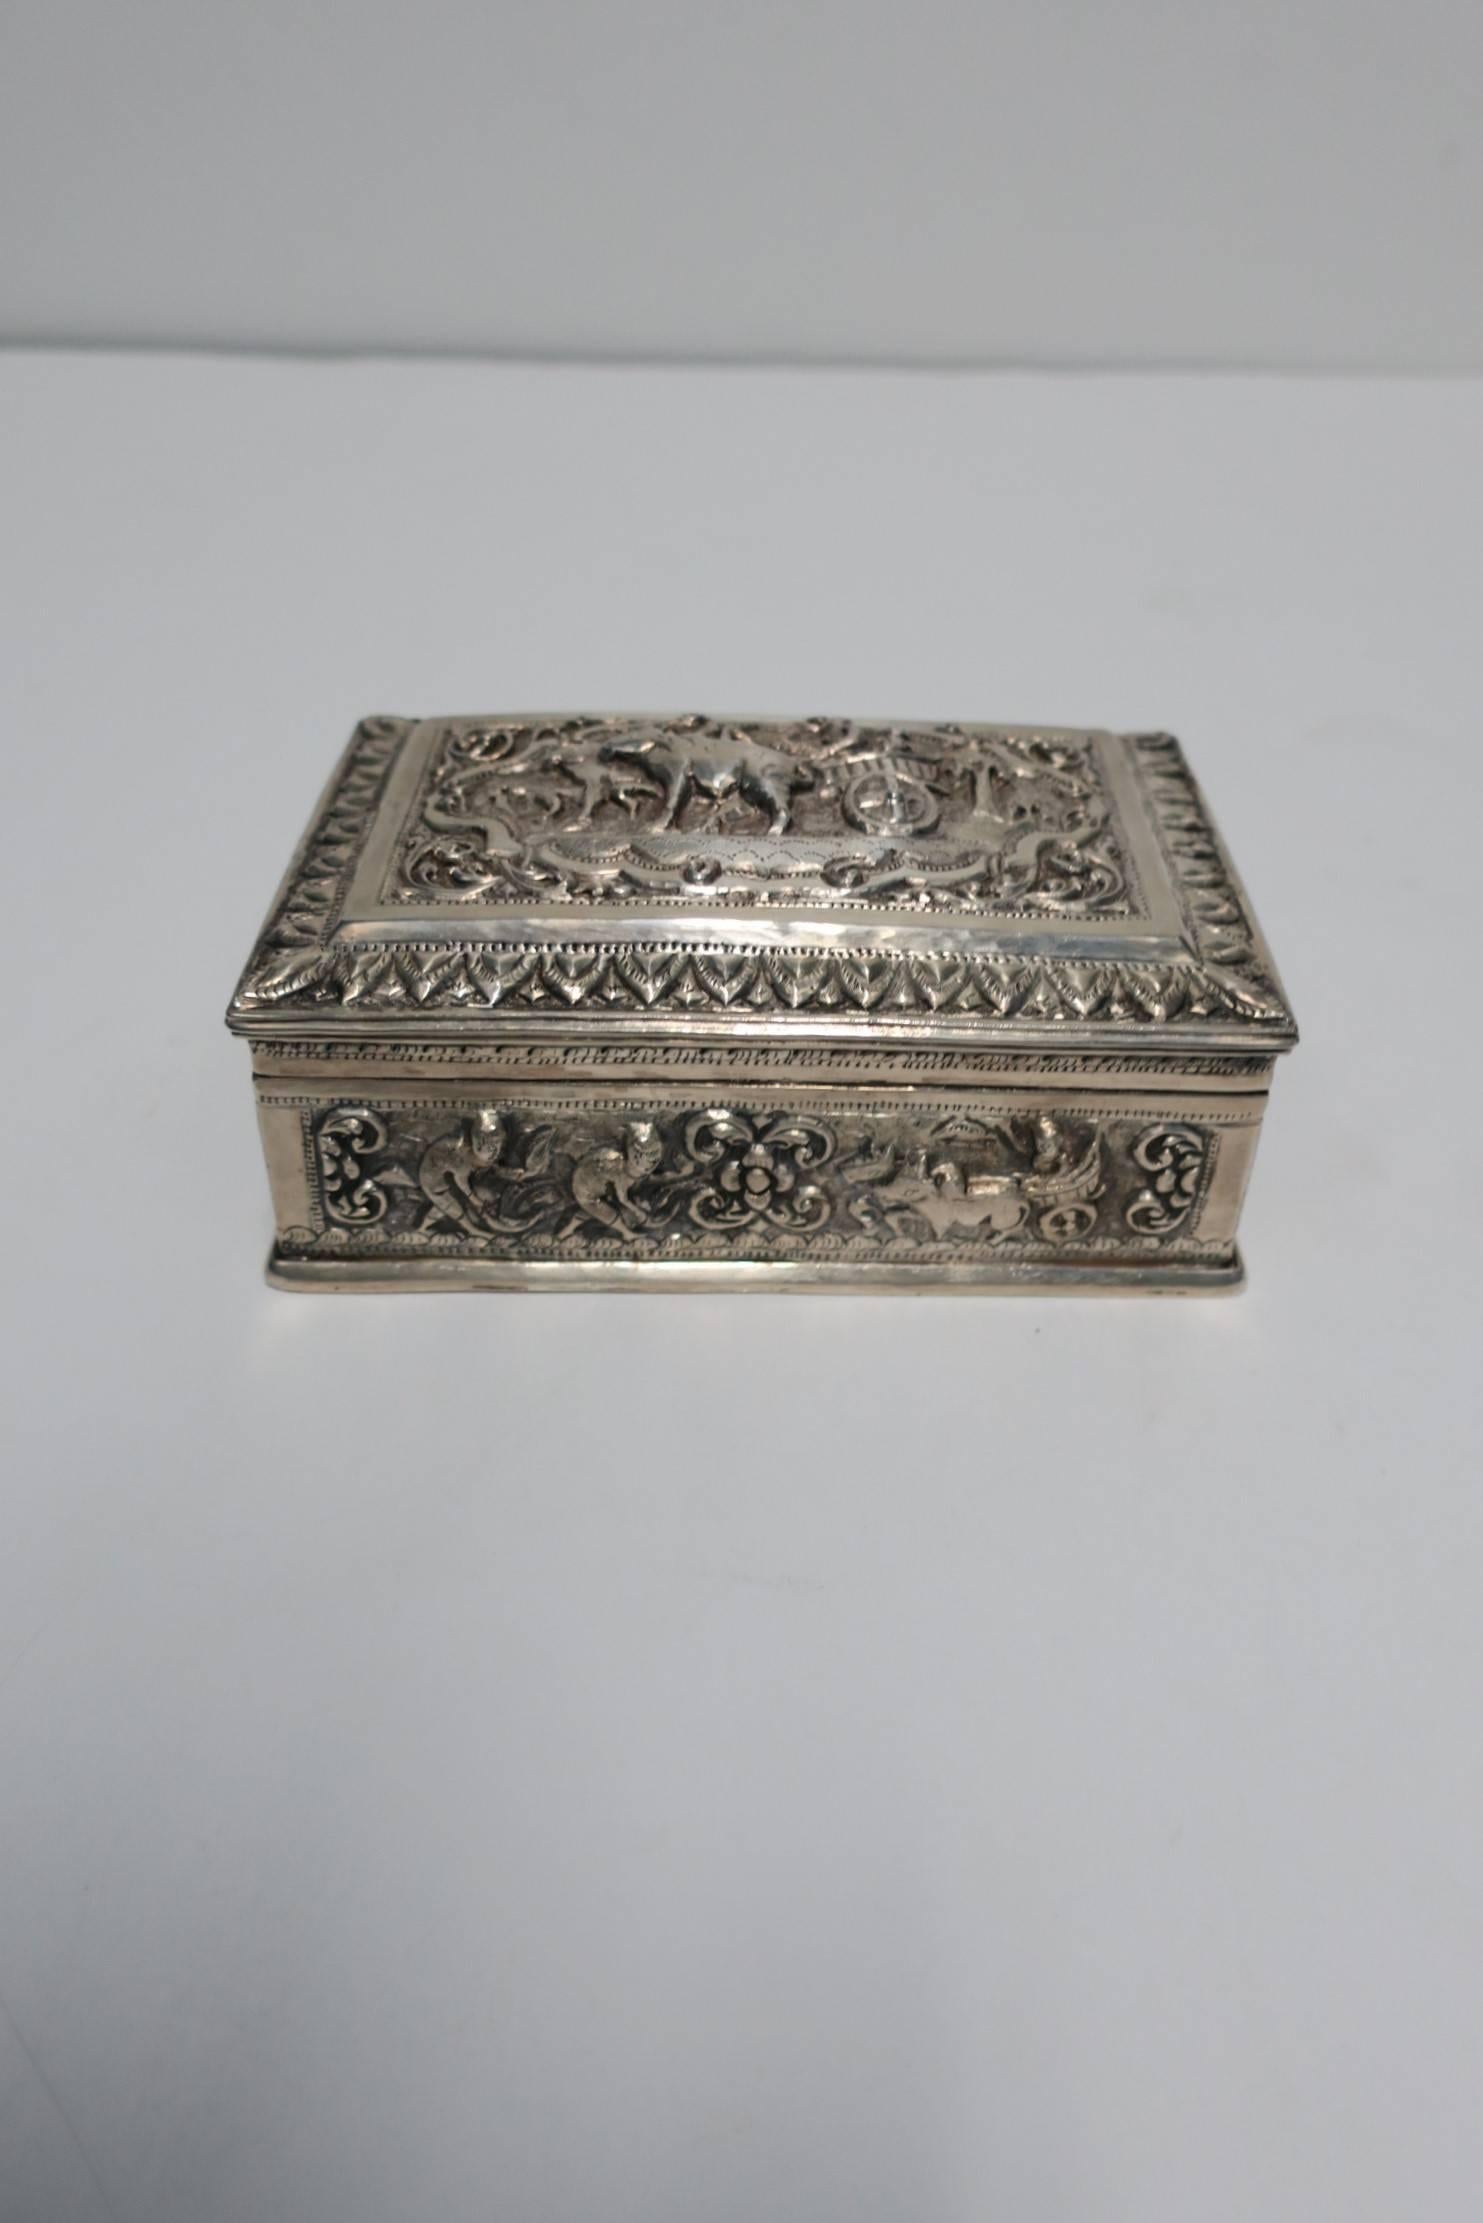 A beautiful vintage substantial decorated sterling silver hinged box with wood interior from Burma. Carved sterling sliver decoration include water buffalo, elephant, foliage, boat with fisherman, a carriage or rickshaw. Marked 